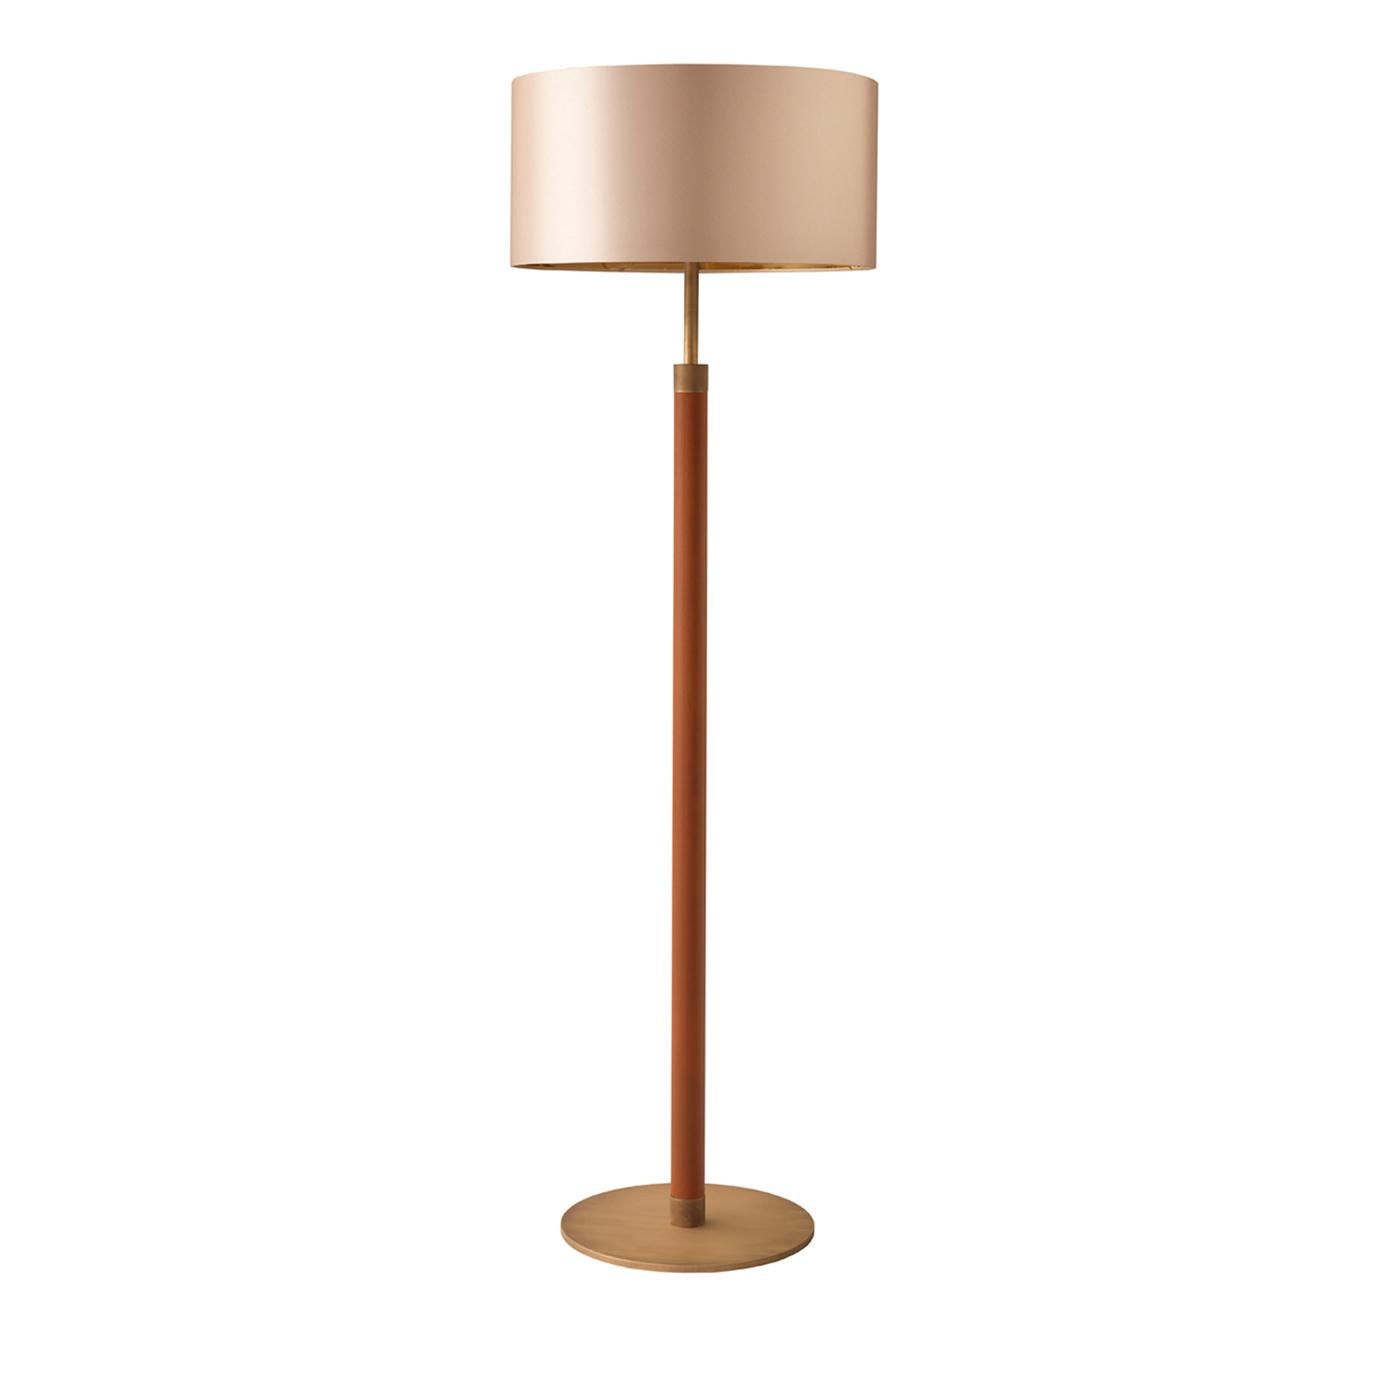 A timeless floor lamp in brass and leather, topped with a silk-effect shade. The 1.7 floor lamp is characterized by a clean but cozy look thanks the use of brass with a burnished finish and cognac leather, making it perfect for warming up Minimalist